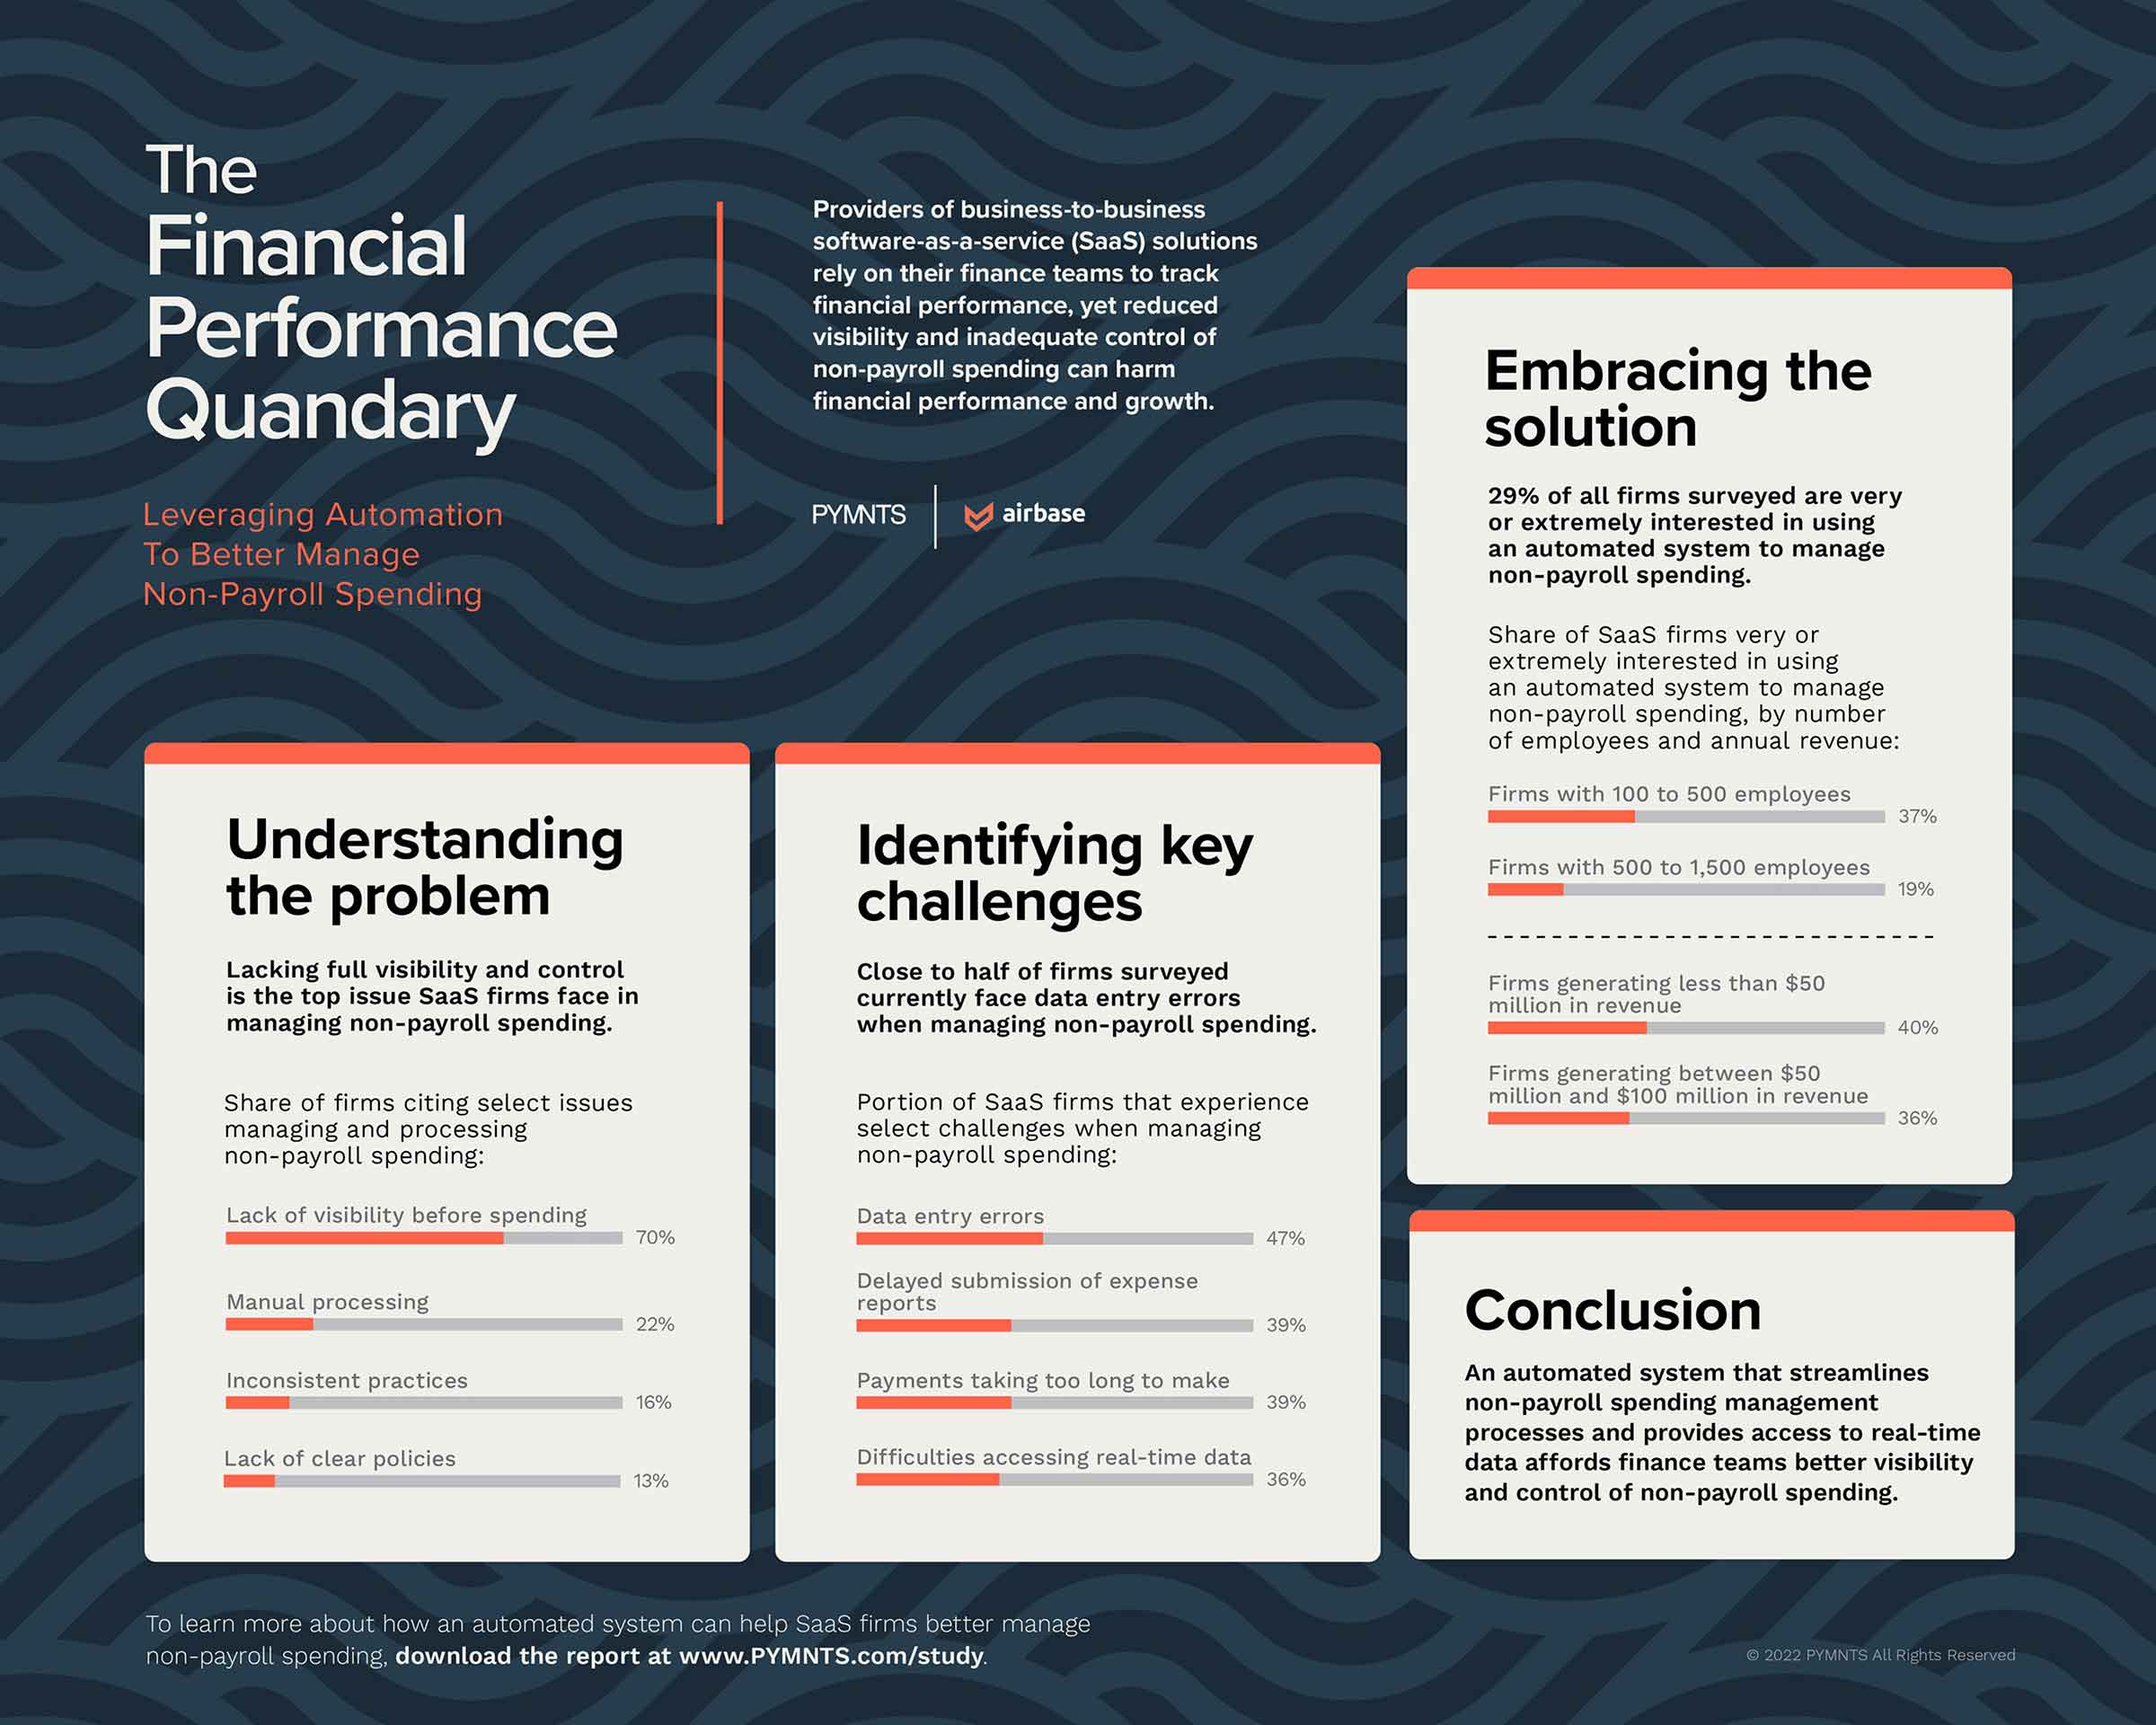 The Financial Performance Quandary infographic